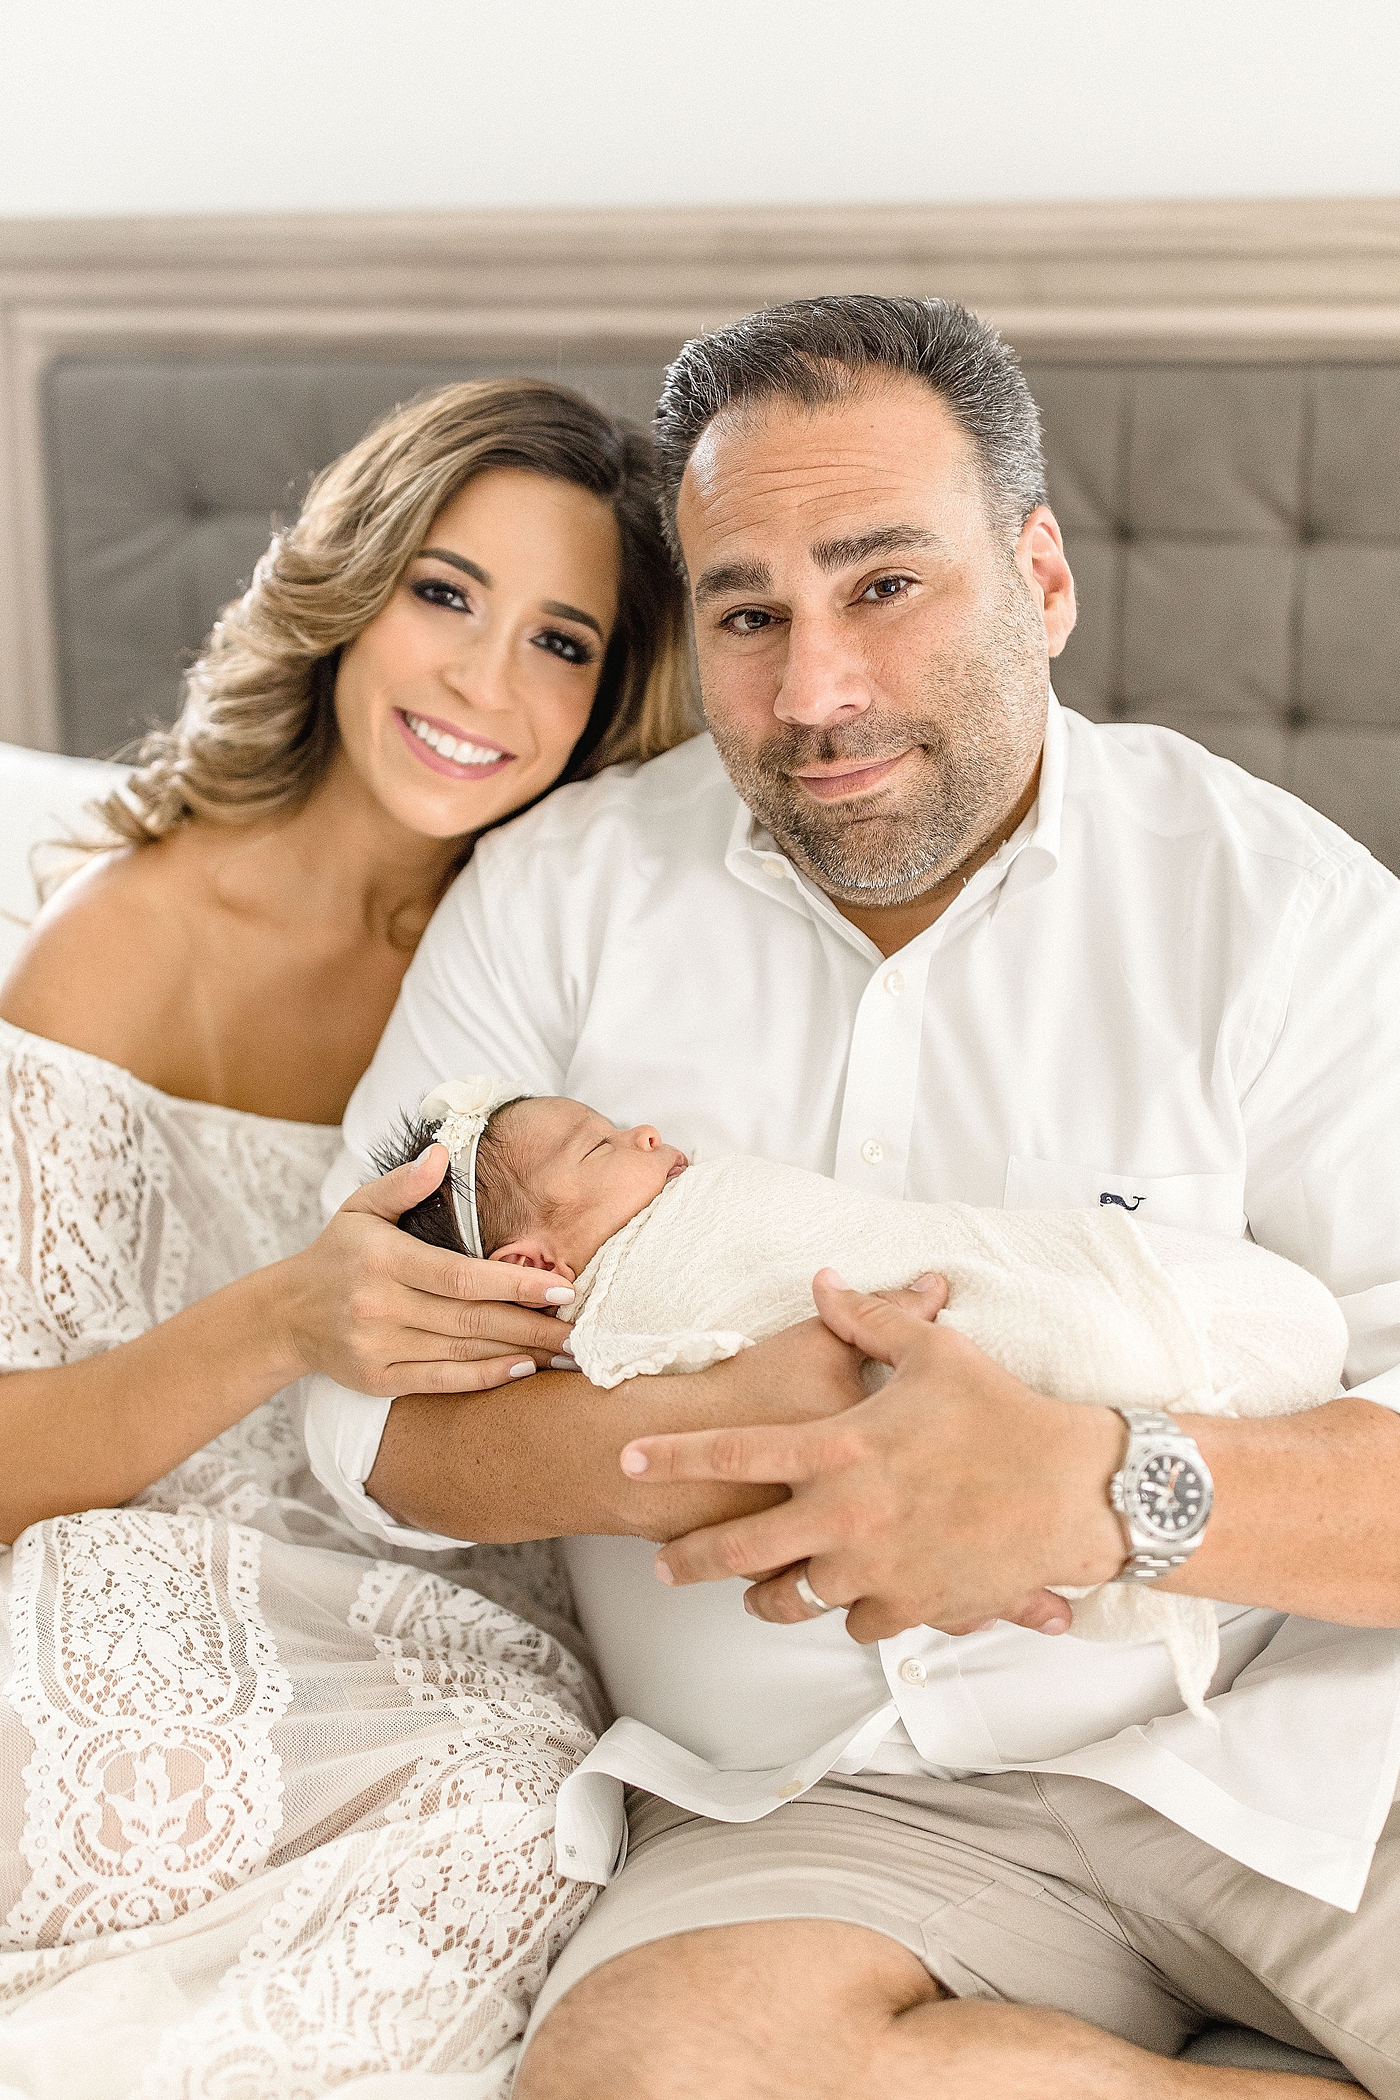 Mom & Dad smile for portrait with newborn daughter. Photo by Ivanna Vidal Photography.